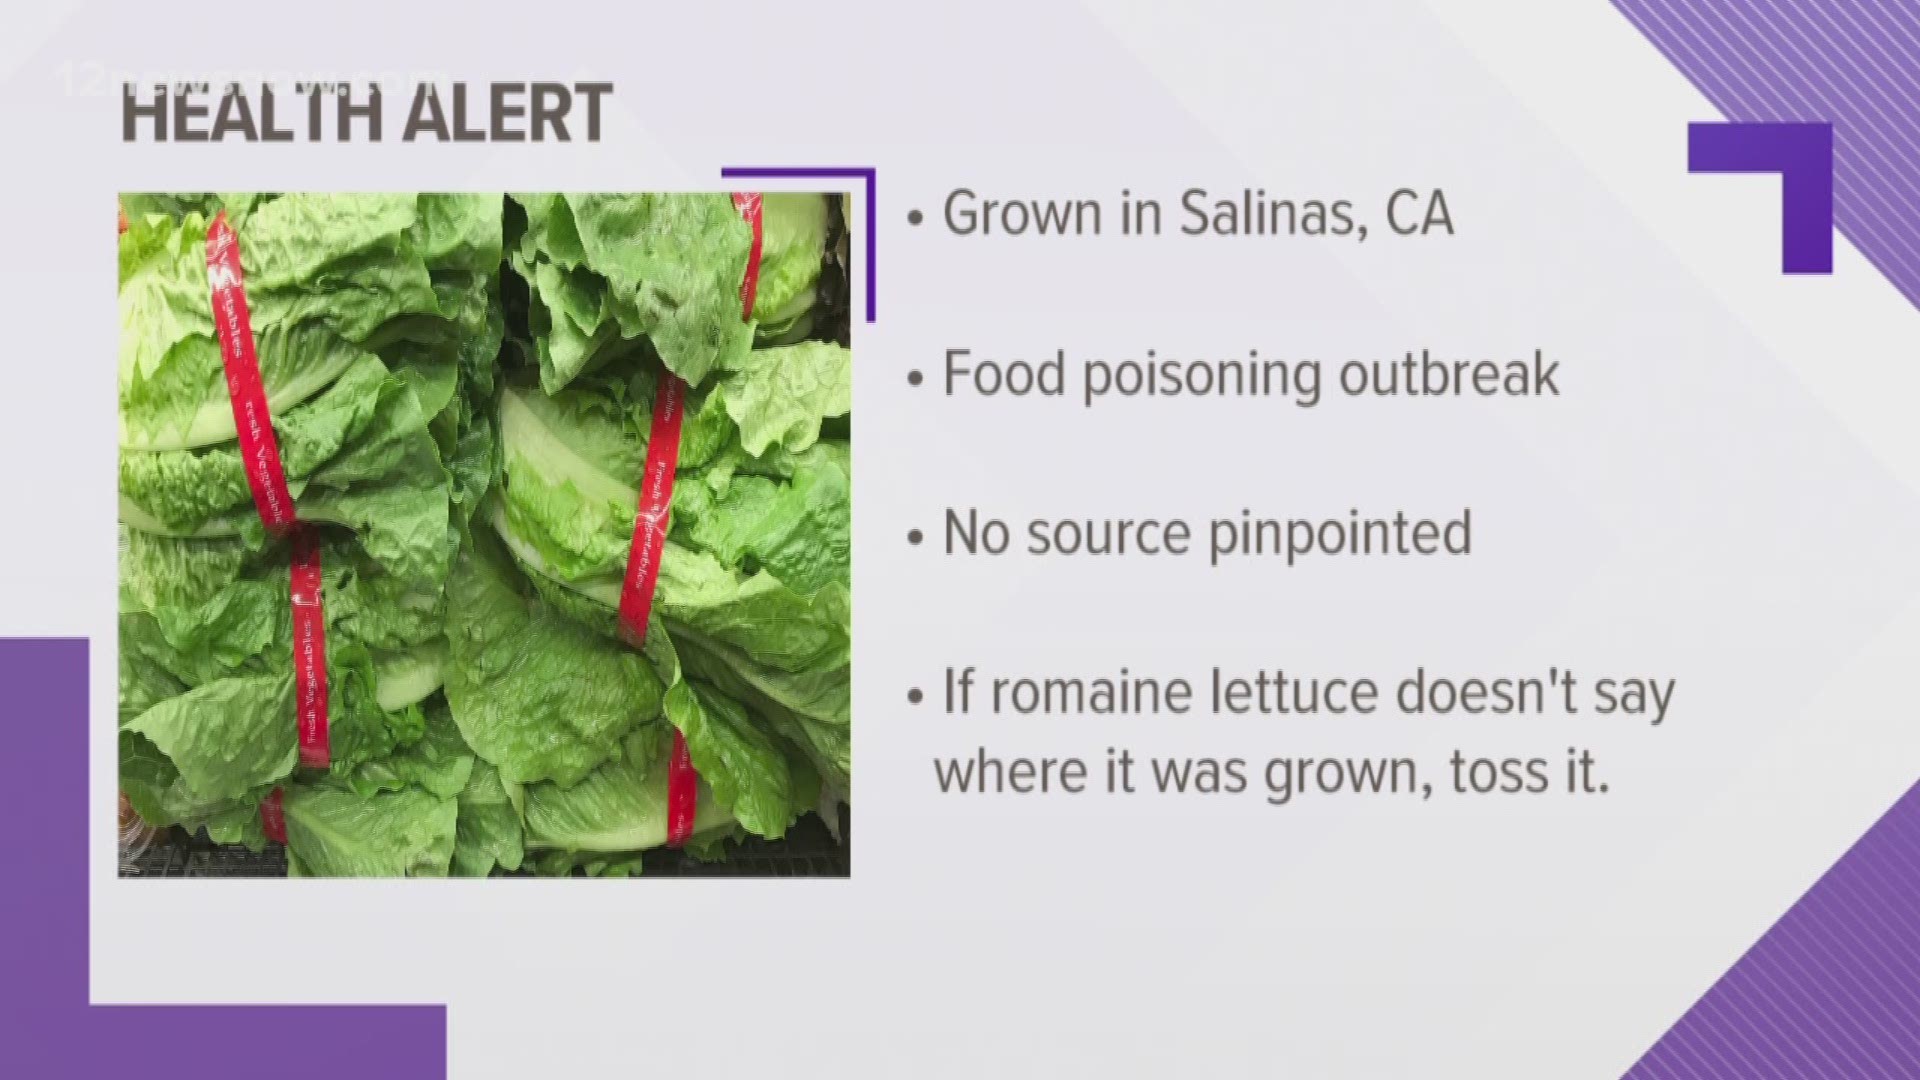 Be extra careful this Thanksgiving holiday. If the romaine lettuce doesn't say where it is grown, throw it away.